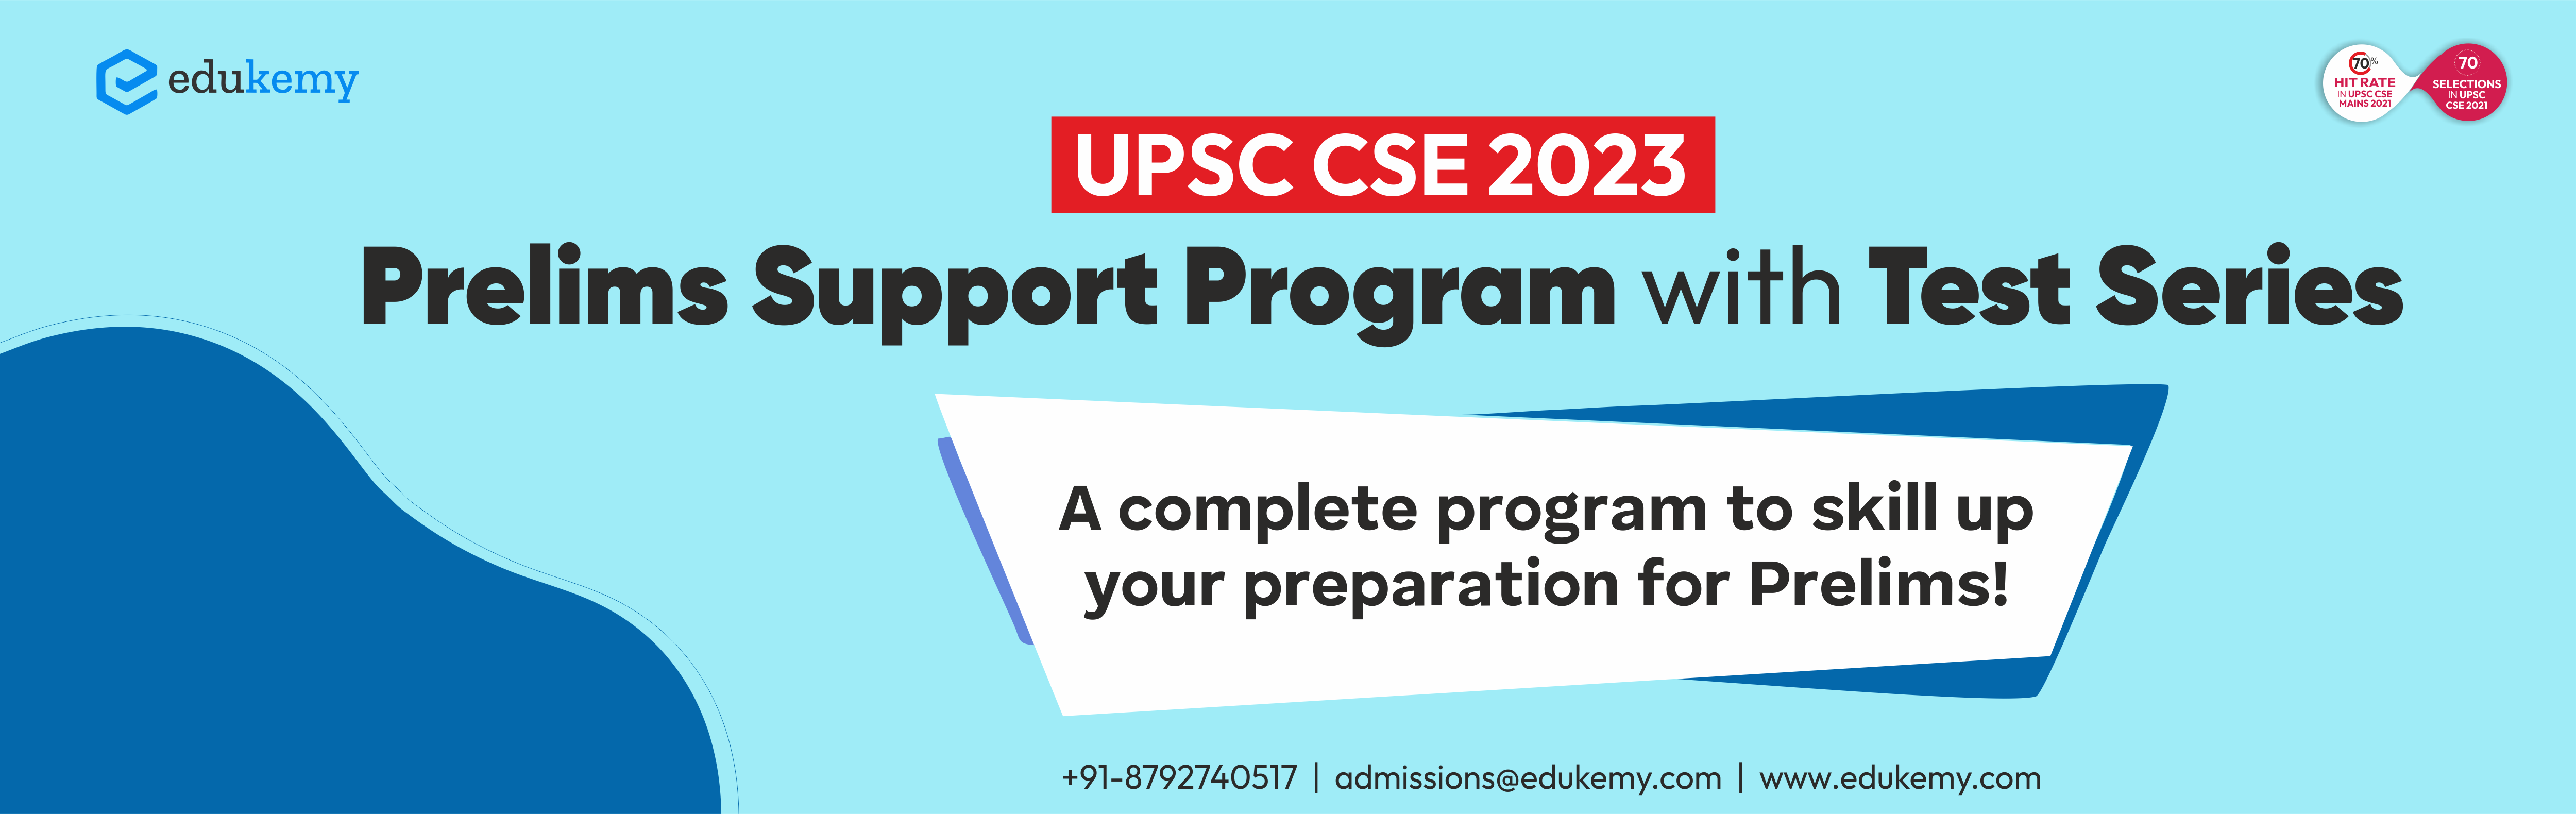 Prelims Support Program with Test Series